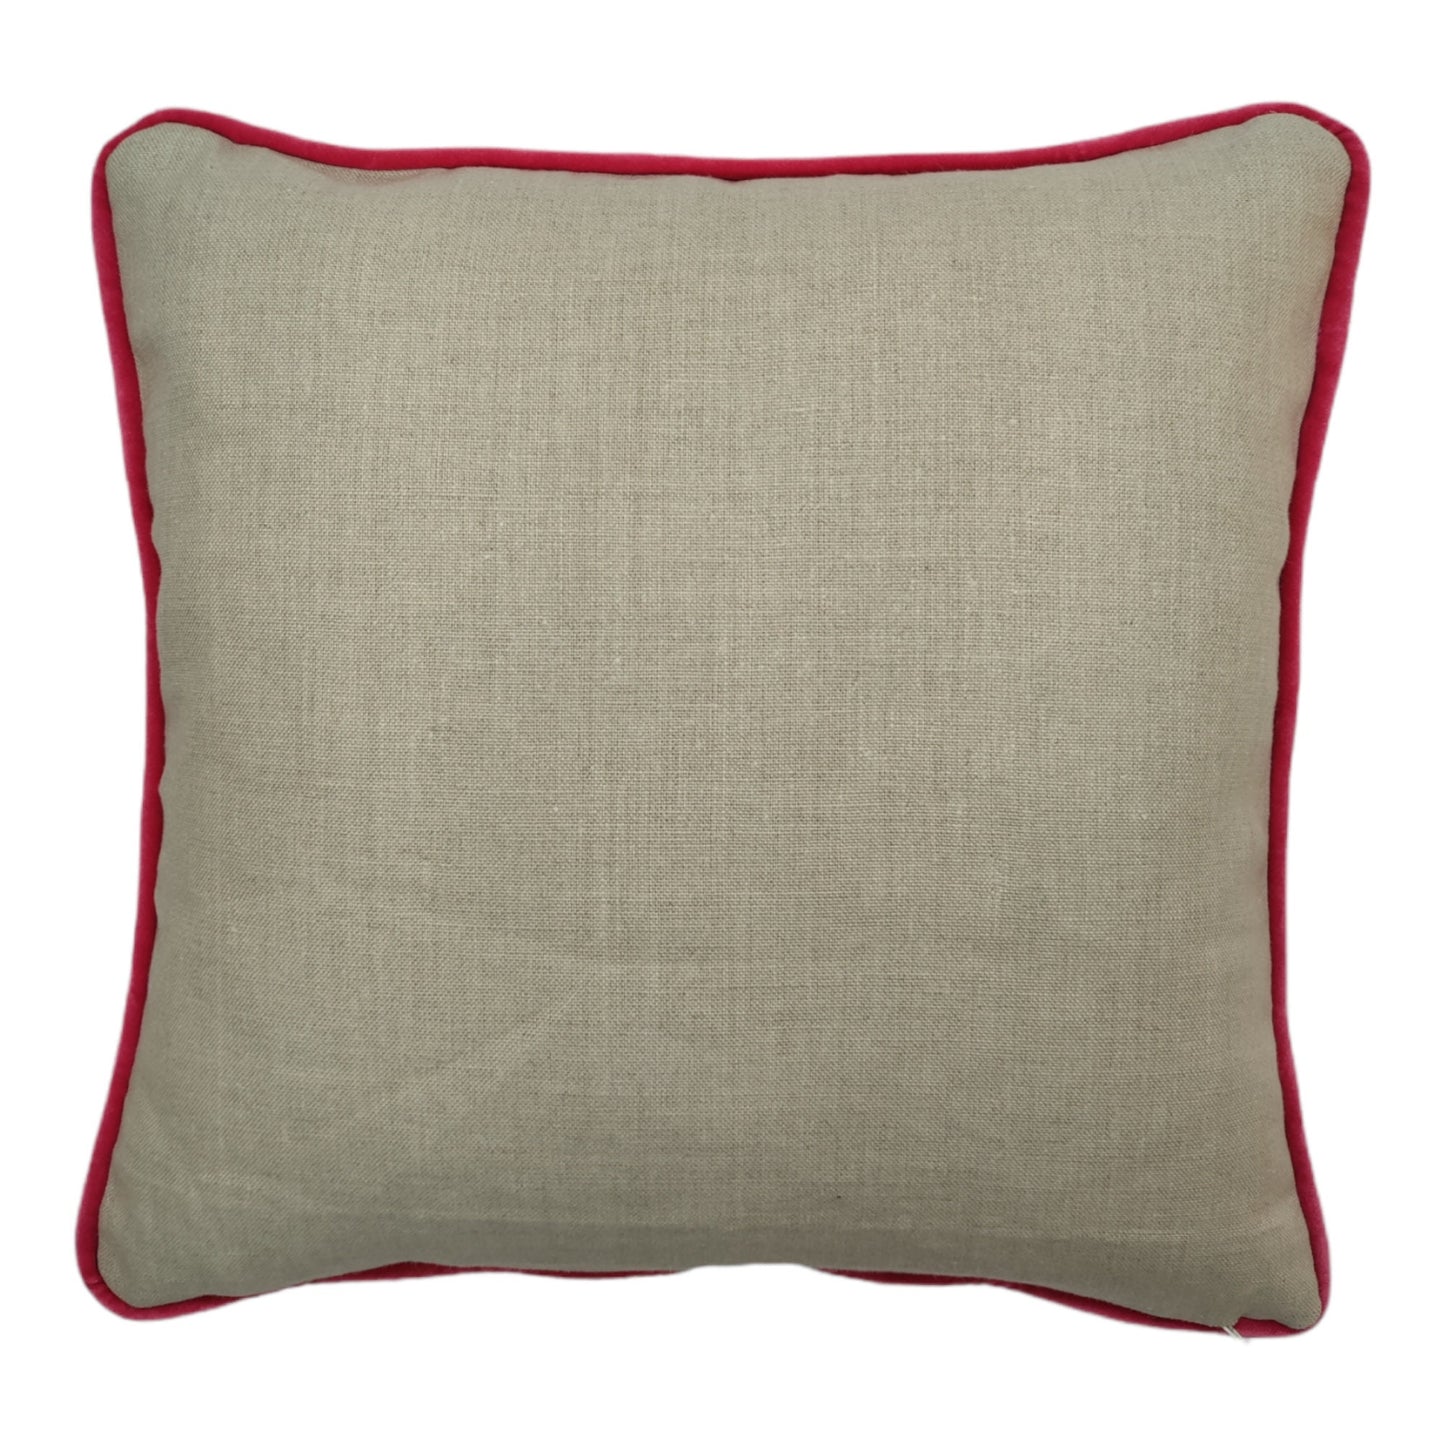 Christopher Farr Lost & Found Cushion